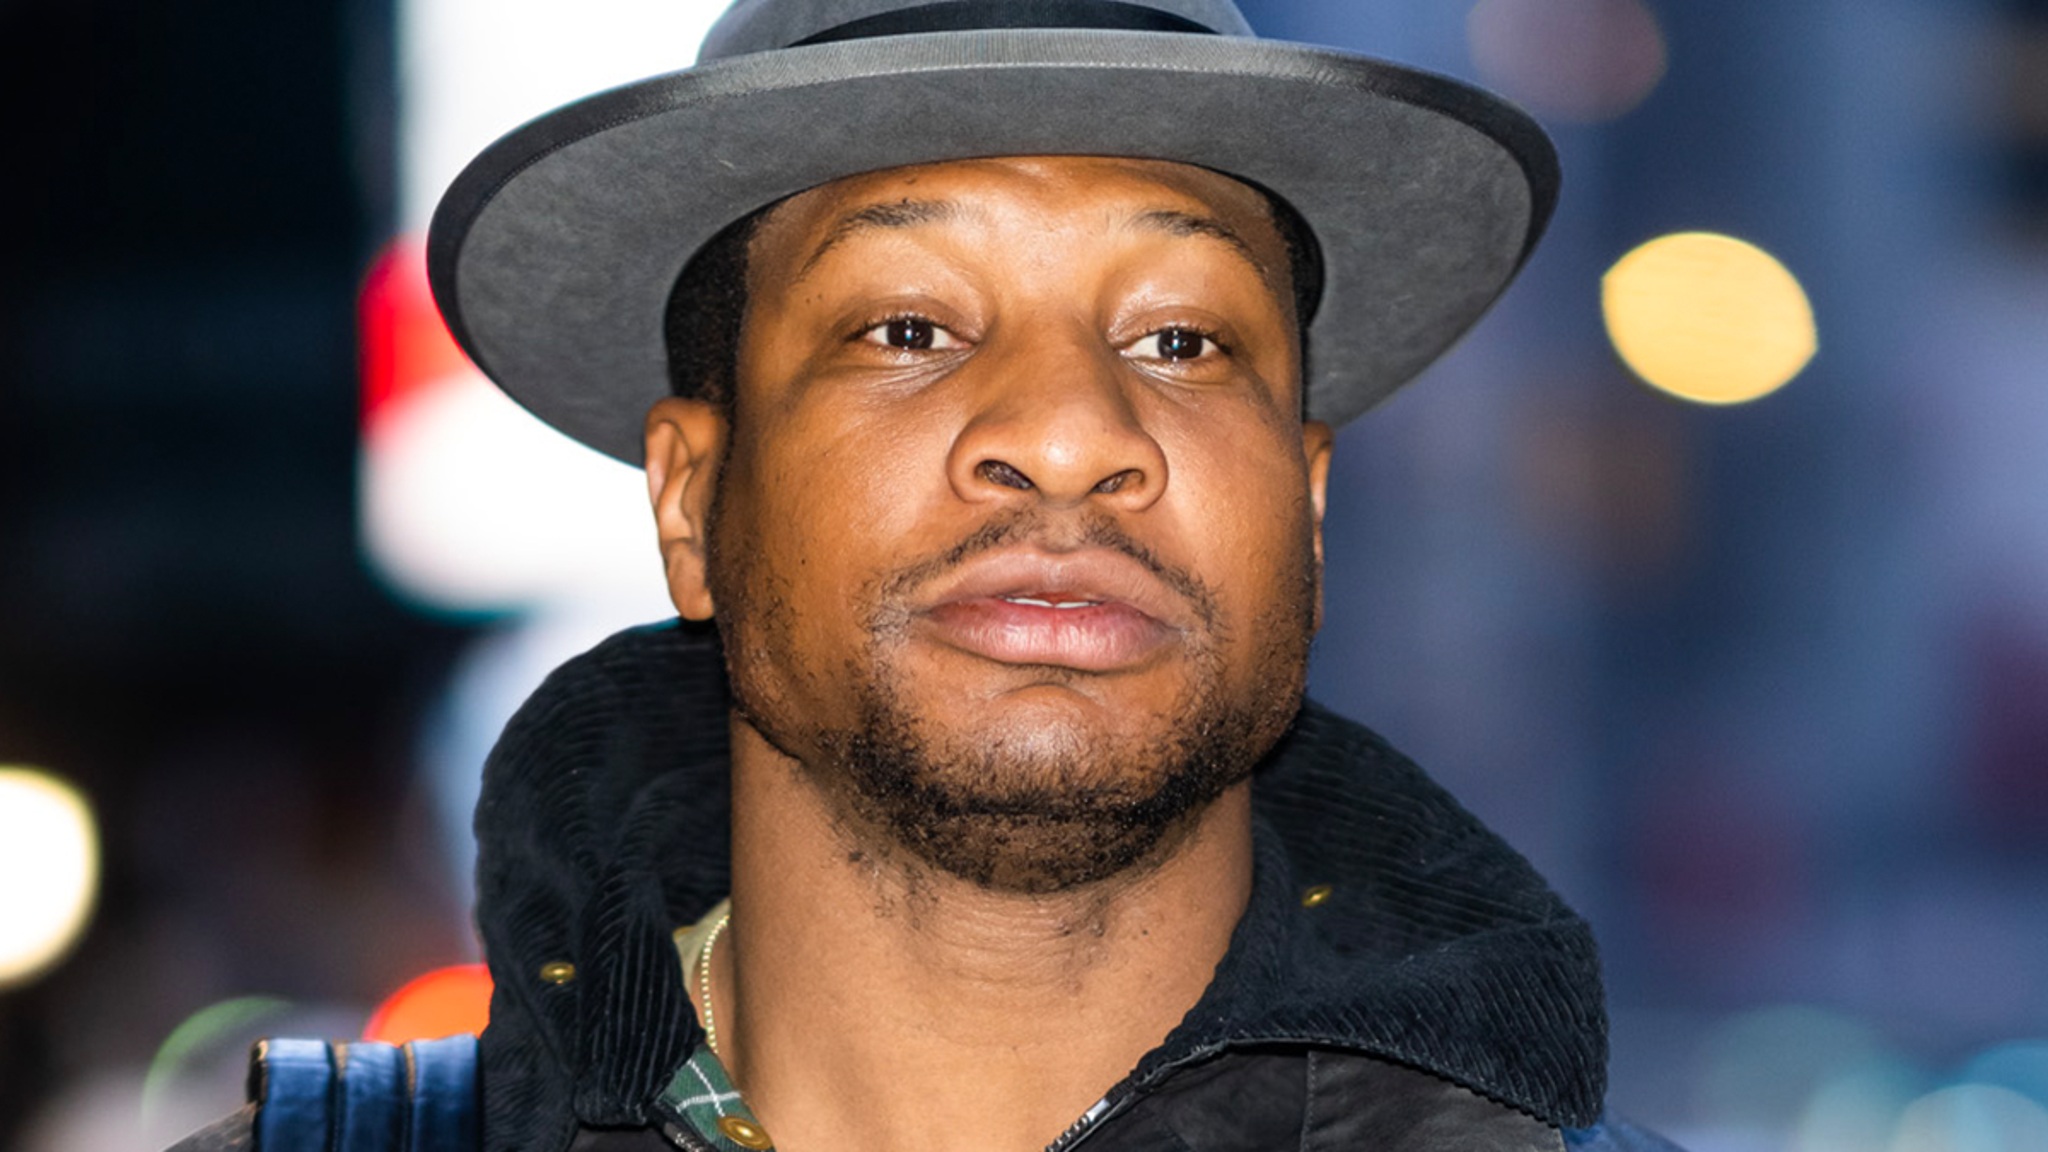 Jonathan Majors’ lawyer says he’s ‘totally innocent’ in assault case